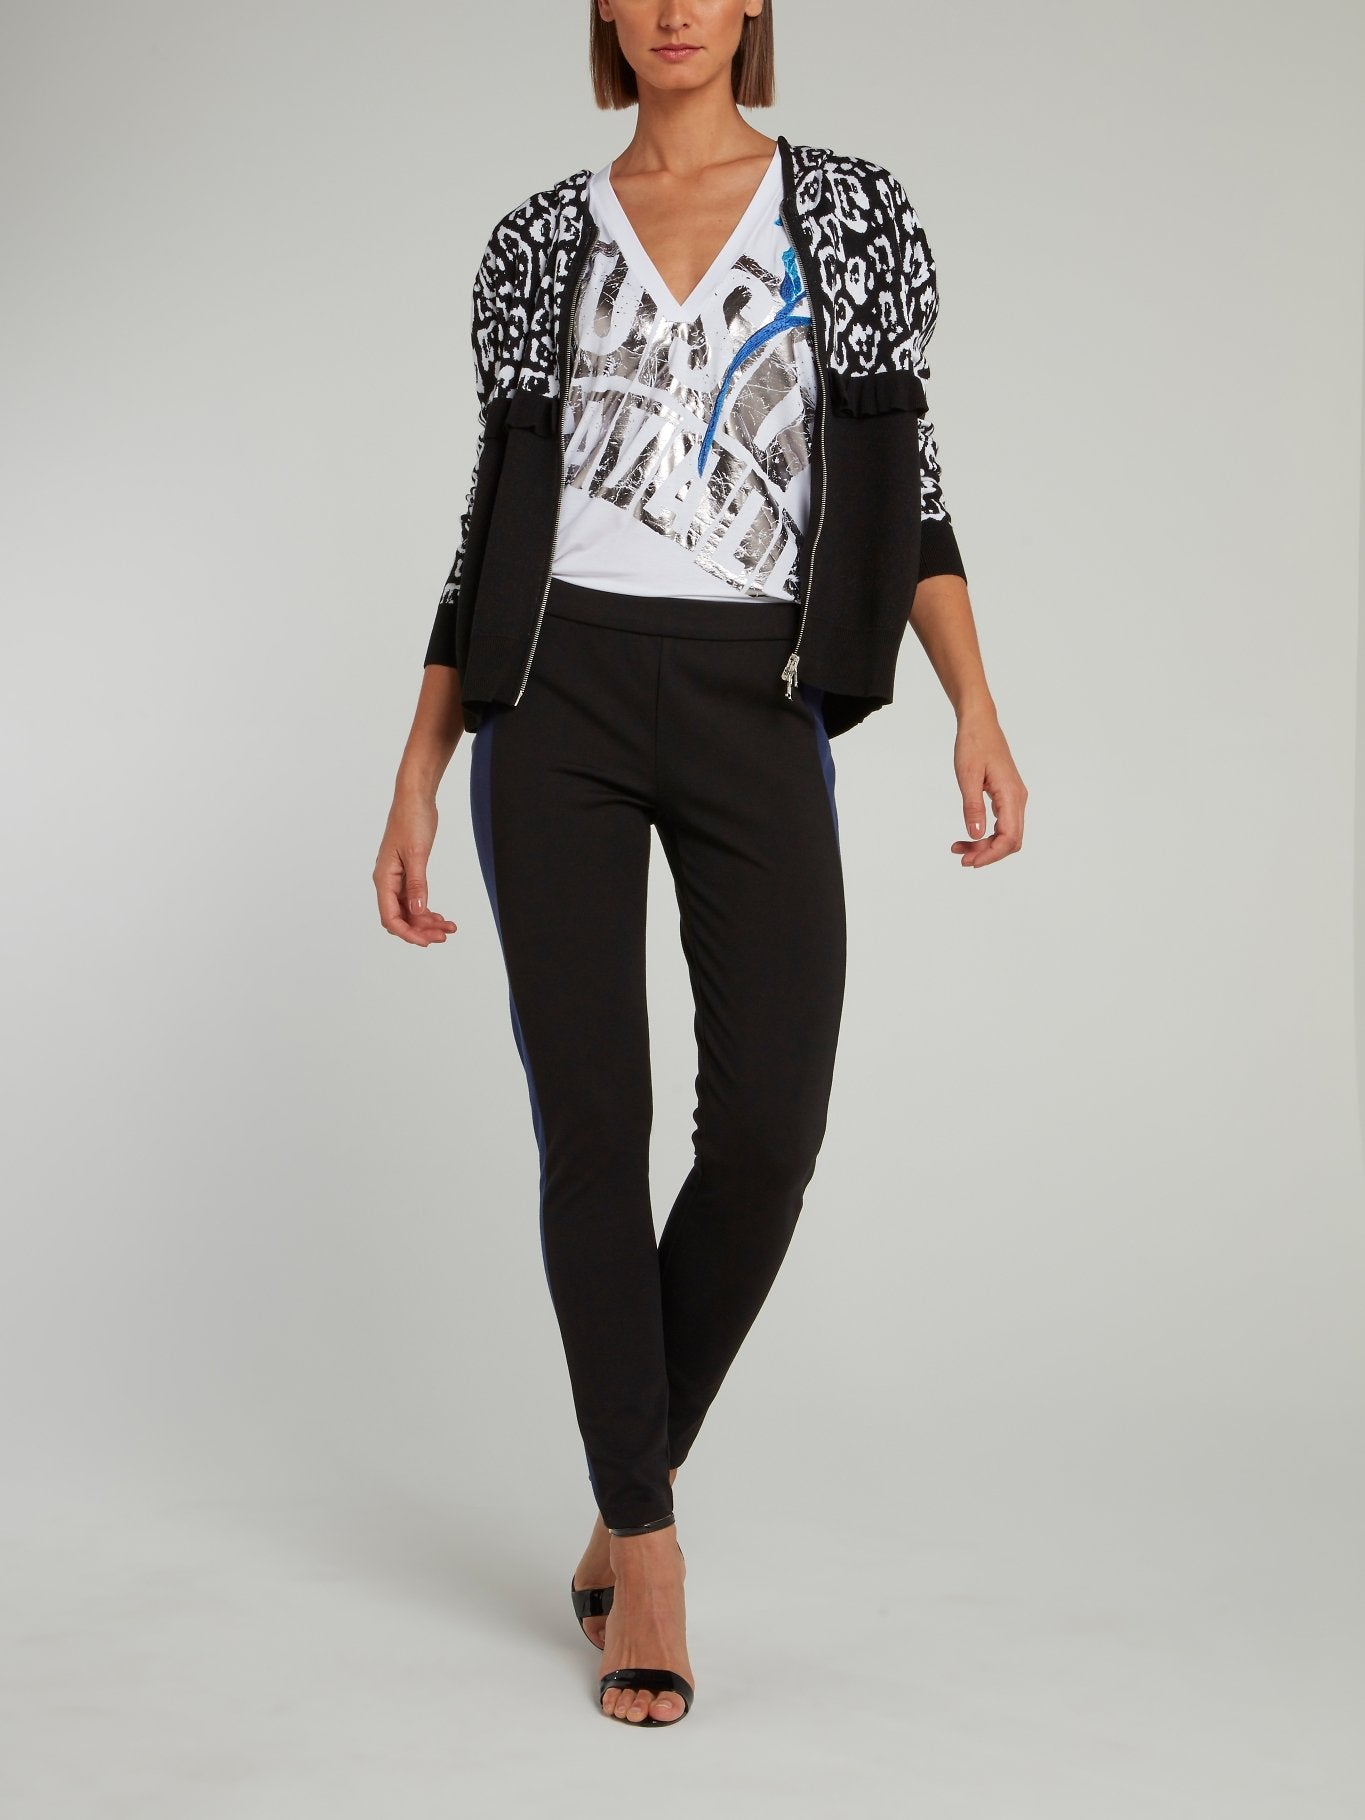 Black and White Mid Frill Leopard Panel Hooded Sweatshirt